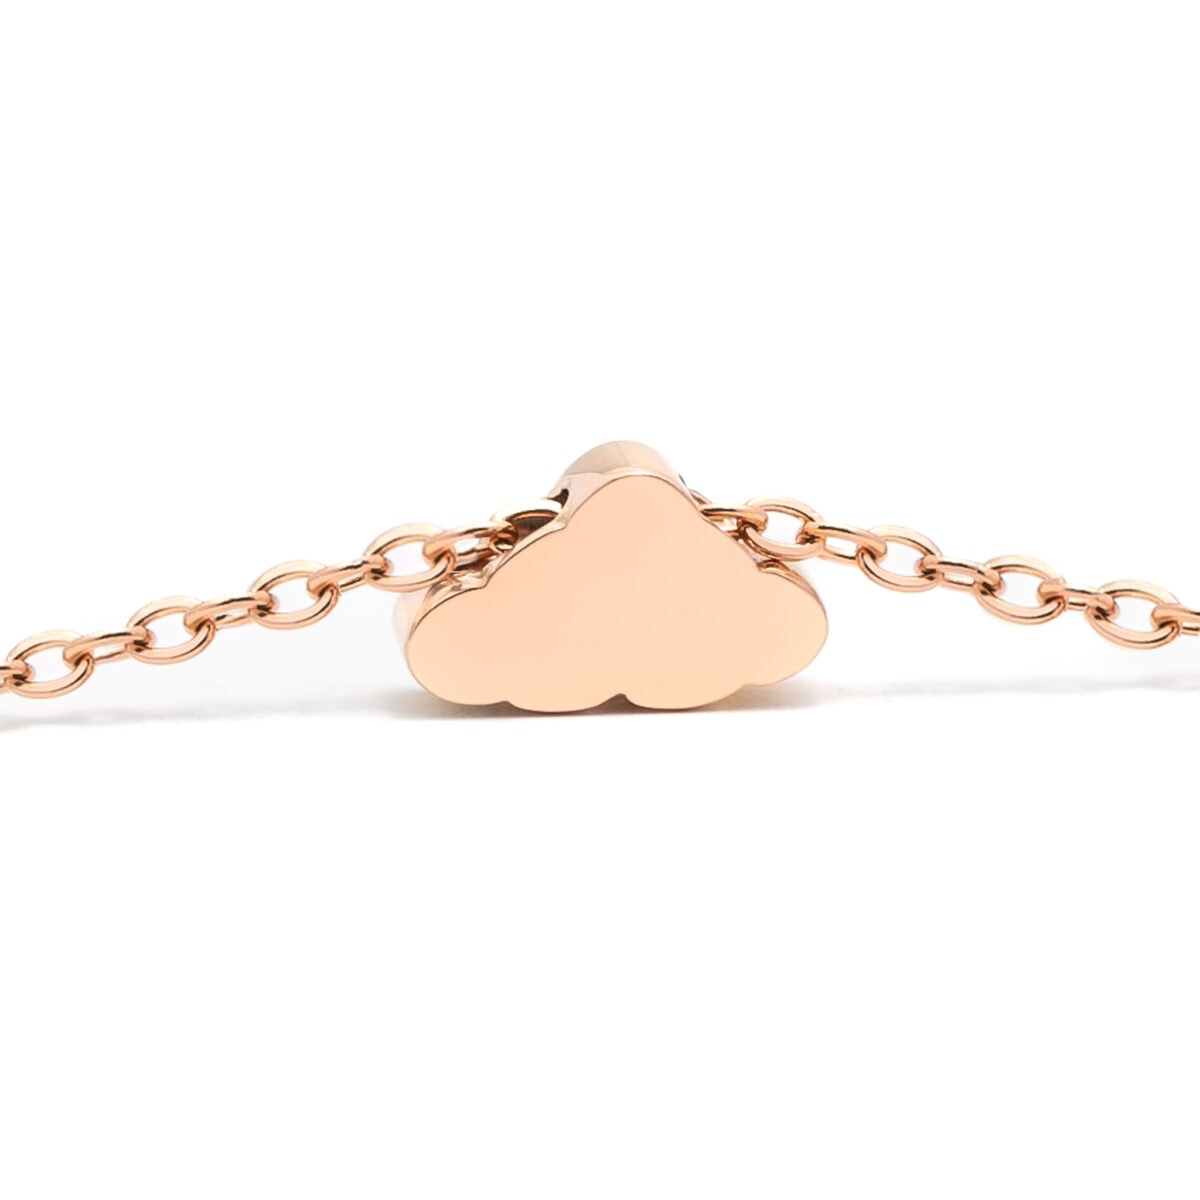 https://m.clubbella.co/product/volare-cloud-rose-gold-charm-necklace/ VOlare Cloud Rose Gold Charm (1)